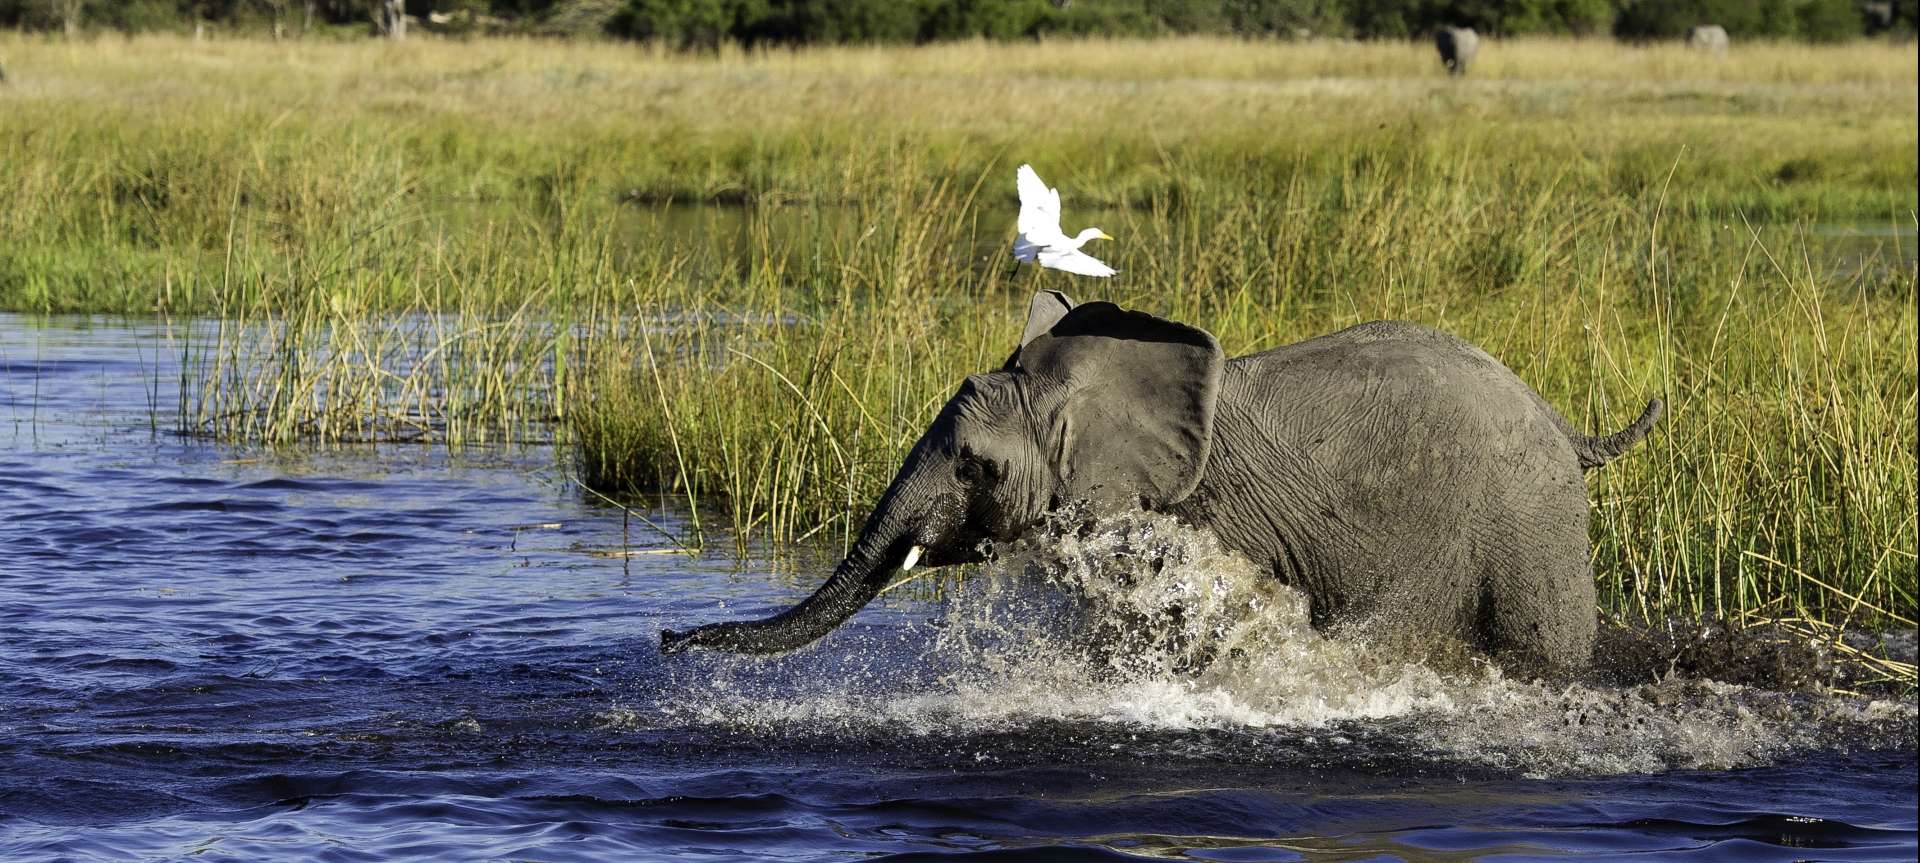 Wildlife is prolific throughout both South Africa and Botswana